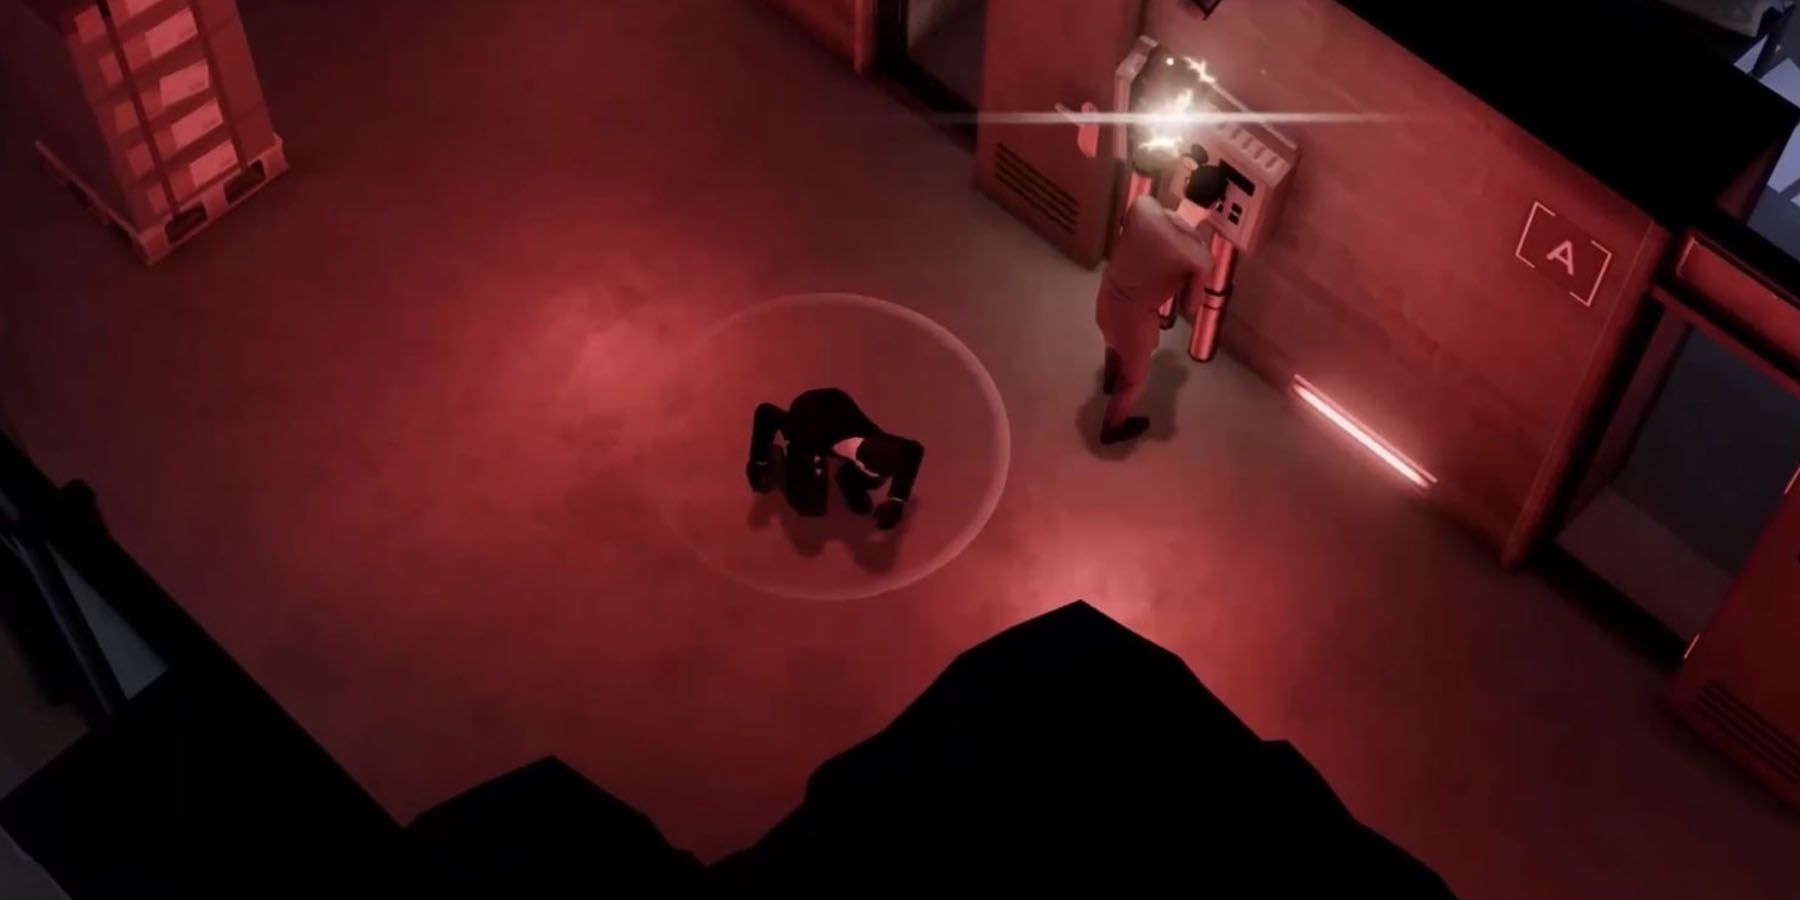 A screenshot of Cypher 007, showing James Bond sneaking past an enemy in a red-lit room.